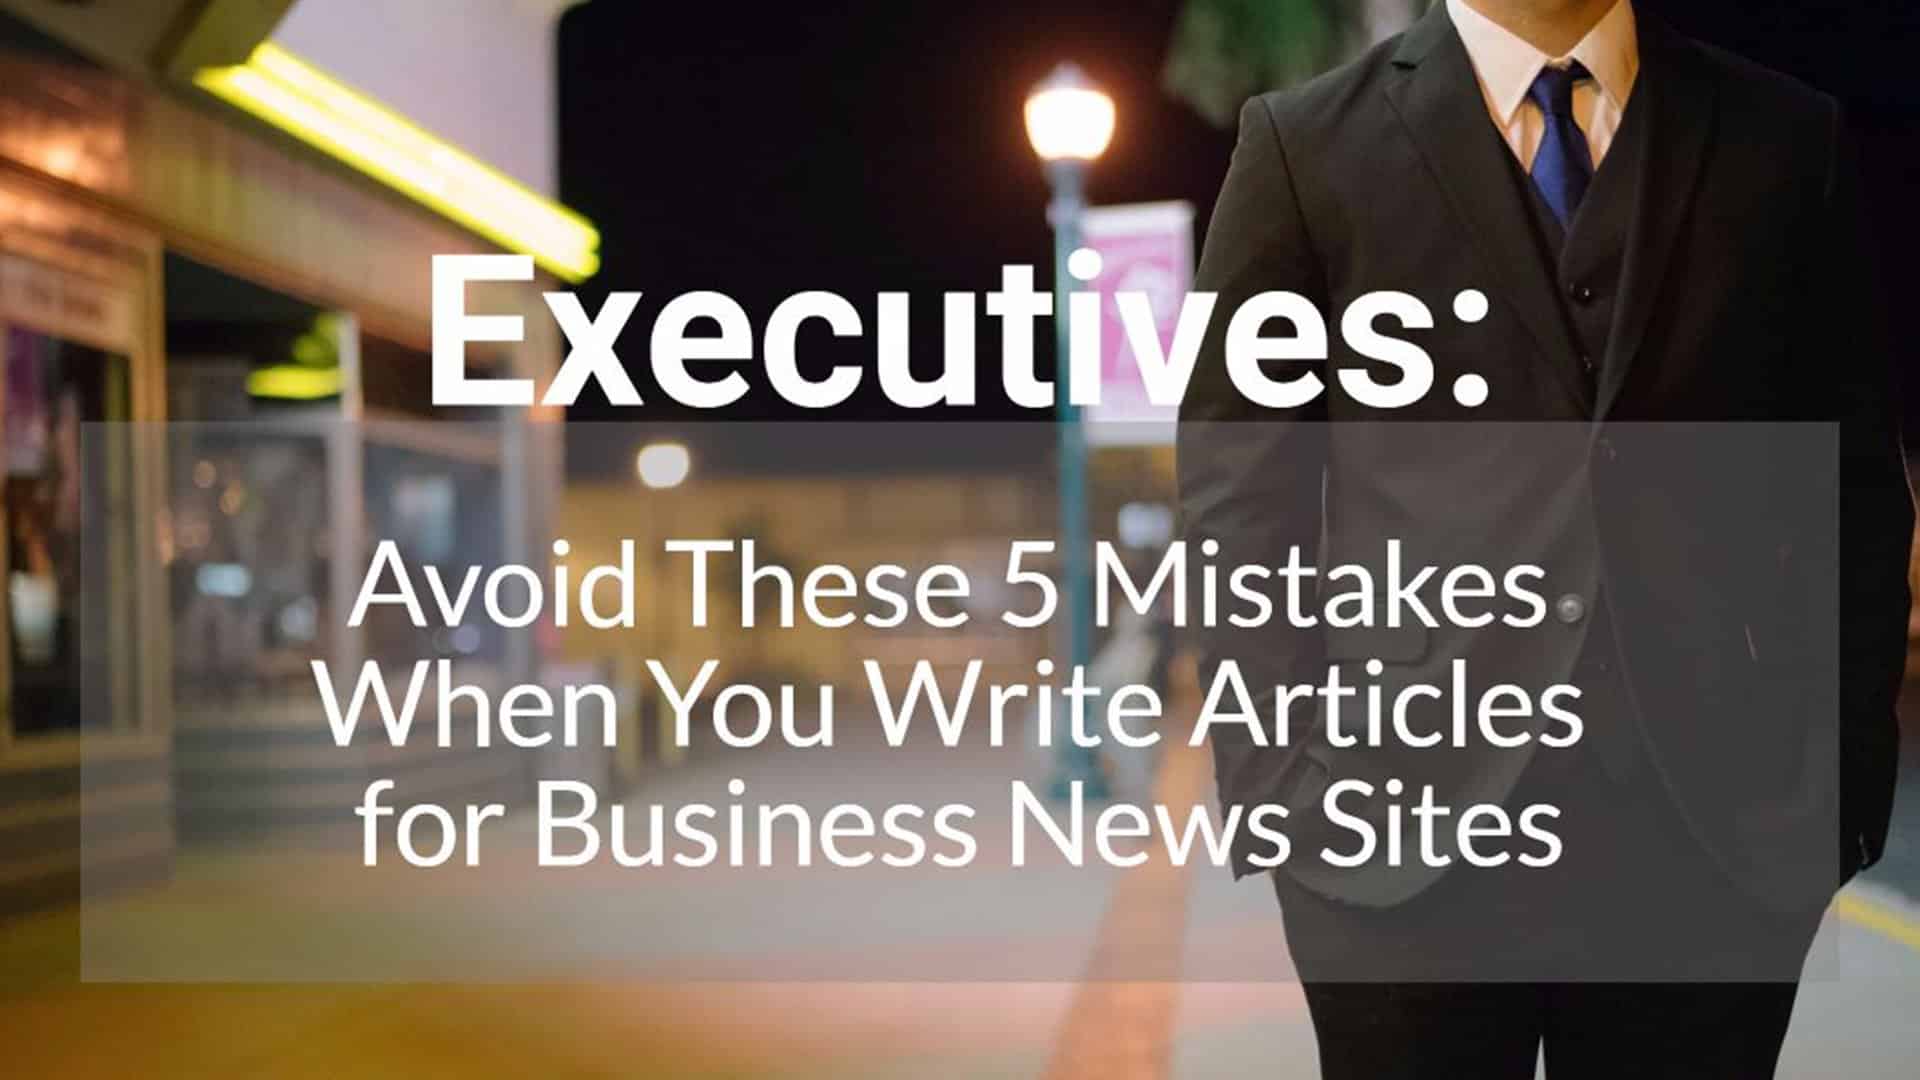 Executives, avoid these 5 mistakes when you write articles for business news sites.